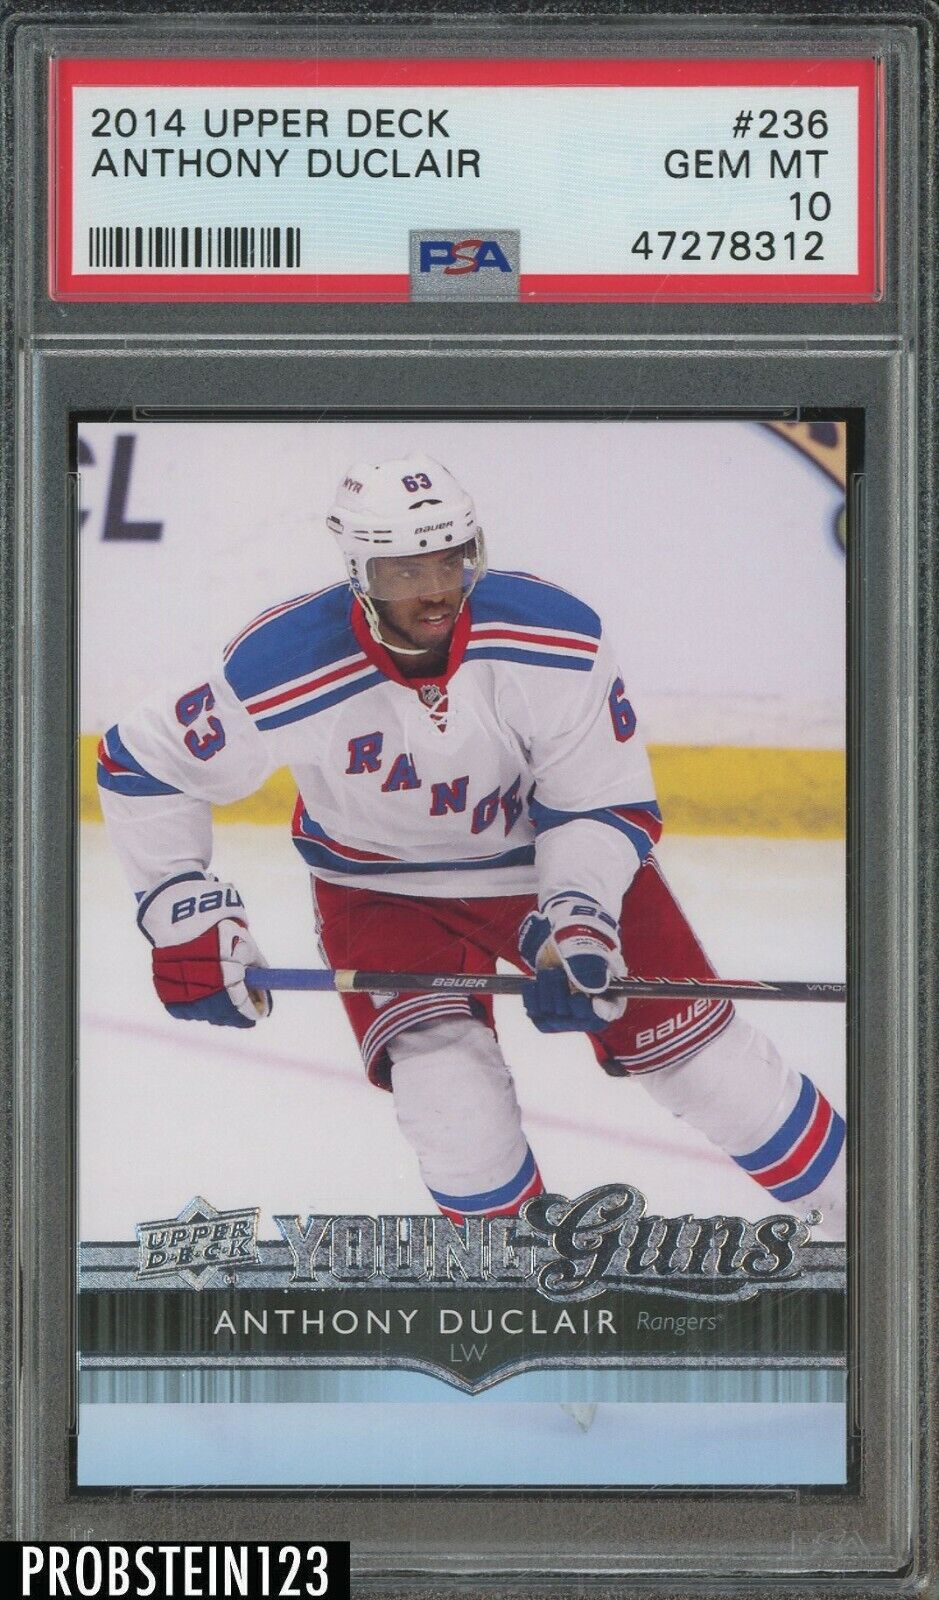 2014-15 Upper Deck Young Guns #236 Anthony Duclair Rangers RC Rookie PSA 10